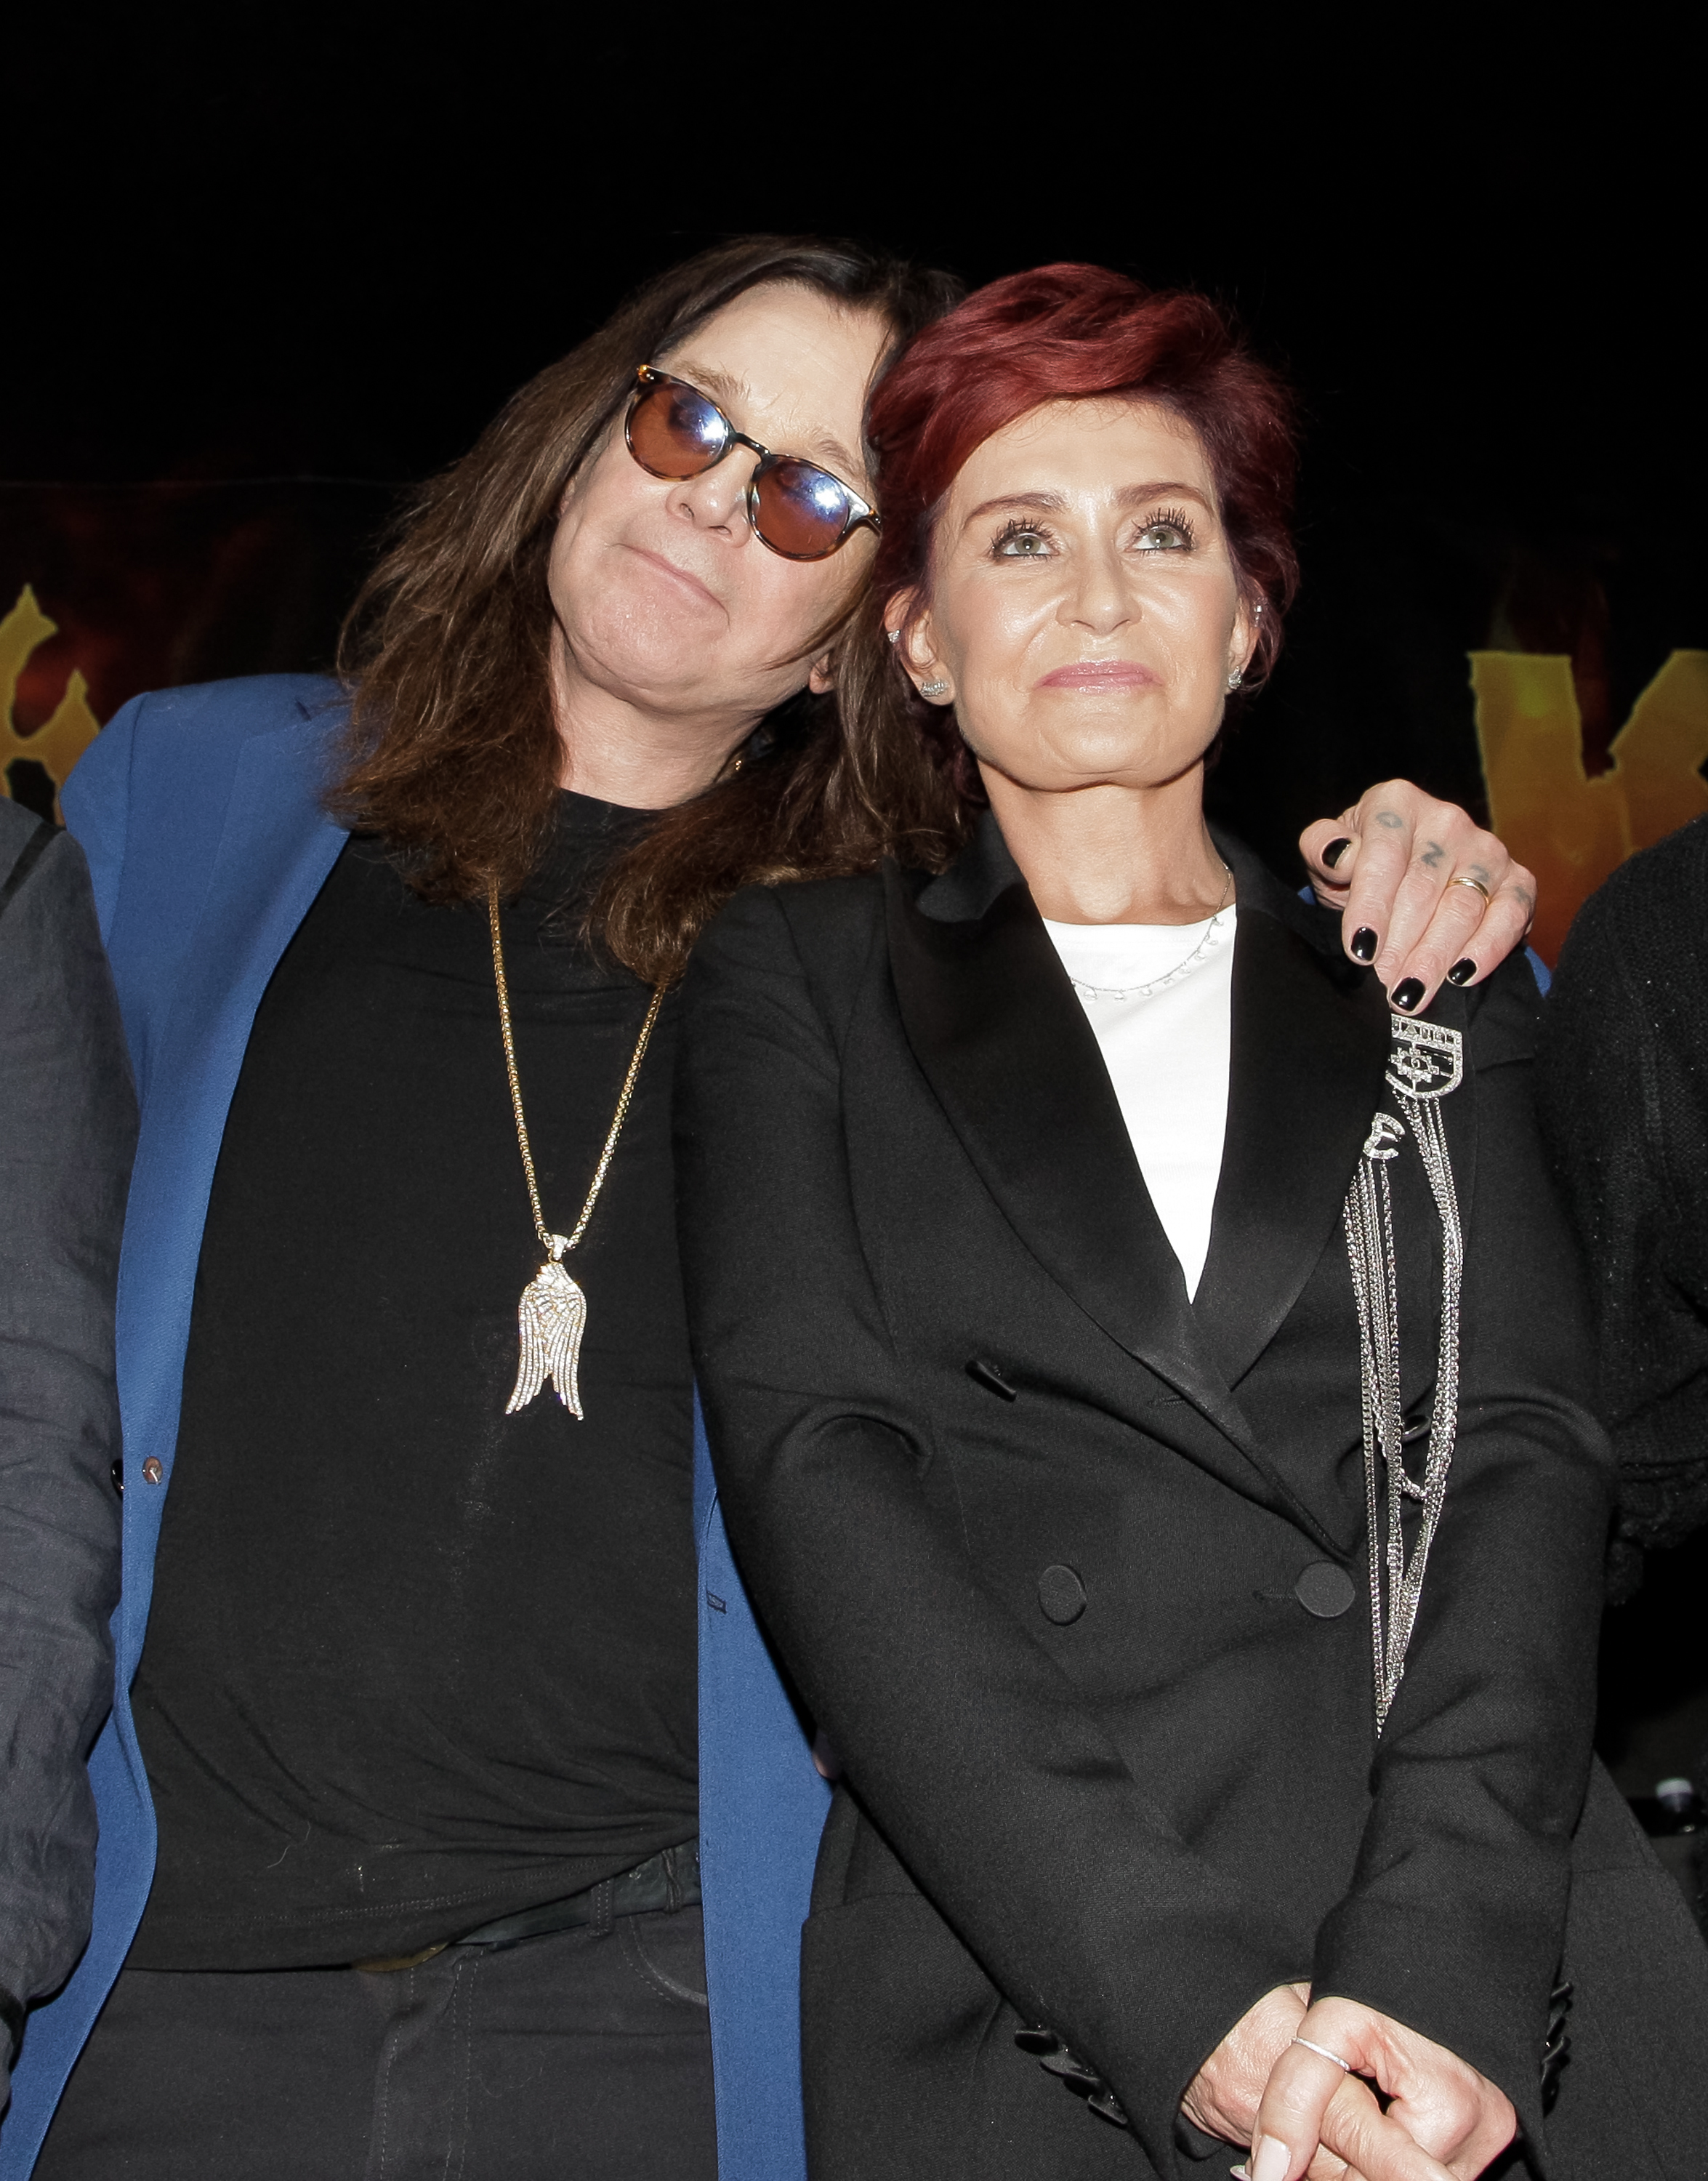 <p>In 2016, news broke that Ozzy Osbourne<a href="https://www.wonderwall.com/entertainment/tv/osbourne-familys-biggest-headline-making-moments-their-reality-tv-show-aired-ozzy-sharon-jack-kelly-3022422.gallery?photoId=1076202"> had been cheating </a>on <a href="https://www.wonderwall.com/celebrity/profiles/overview/sharon-osbourne-1449.article">Sharon Osbourne</a>, his wife of more than 30 years at the time, with hairdresser Michelle Pugh. Sharon disclosed details of her husband's affairs in an interview with The Daily Telegraph in 2017 -- namely that Michelle wasn't the only woman he'd been involved with. "Some Russian teenager, then a masseuse in England, our masseuse [in the States] and then our cook," she said. "He had women in different countries. Basically, if you're a woman giving Ozzy either a back rub or a trolley of food, God help you." His relationship with Michelle, however, was allegedly the longest -- they secretly engaged in a four-year affair. "When I say he gave me the greatest love of my life, I mean it," Michelle told People magazine in 2016. "He made me feel like the most beautiful and worshipped woman in the world." (Ozzy has since insisted that his relationship with Michelle was strictly physical.) He and Sharon briefly split but soon reconciled following the cheating scandal.</p>